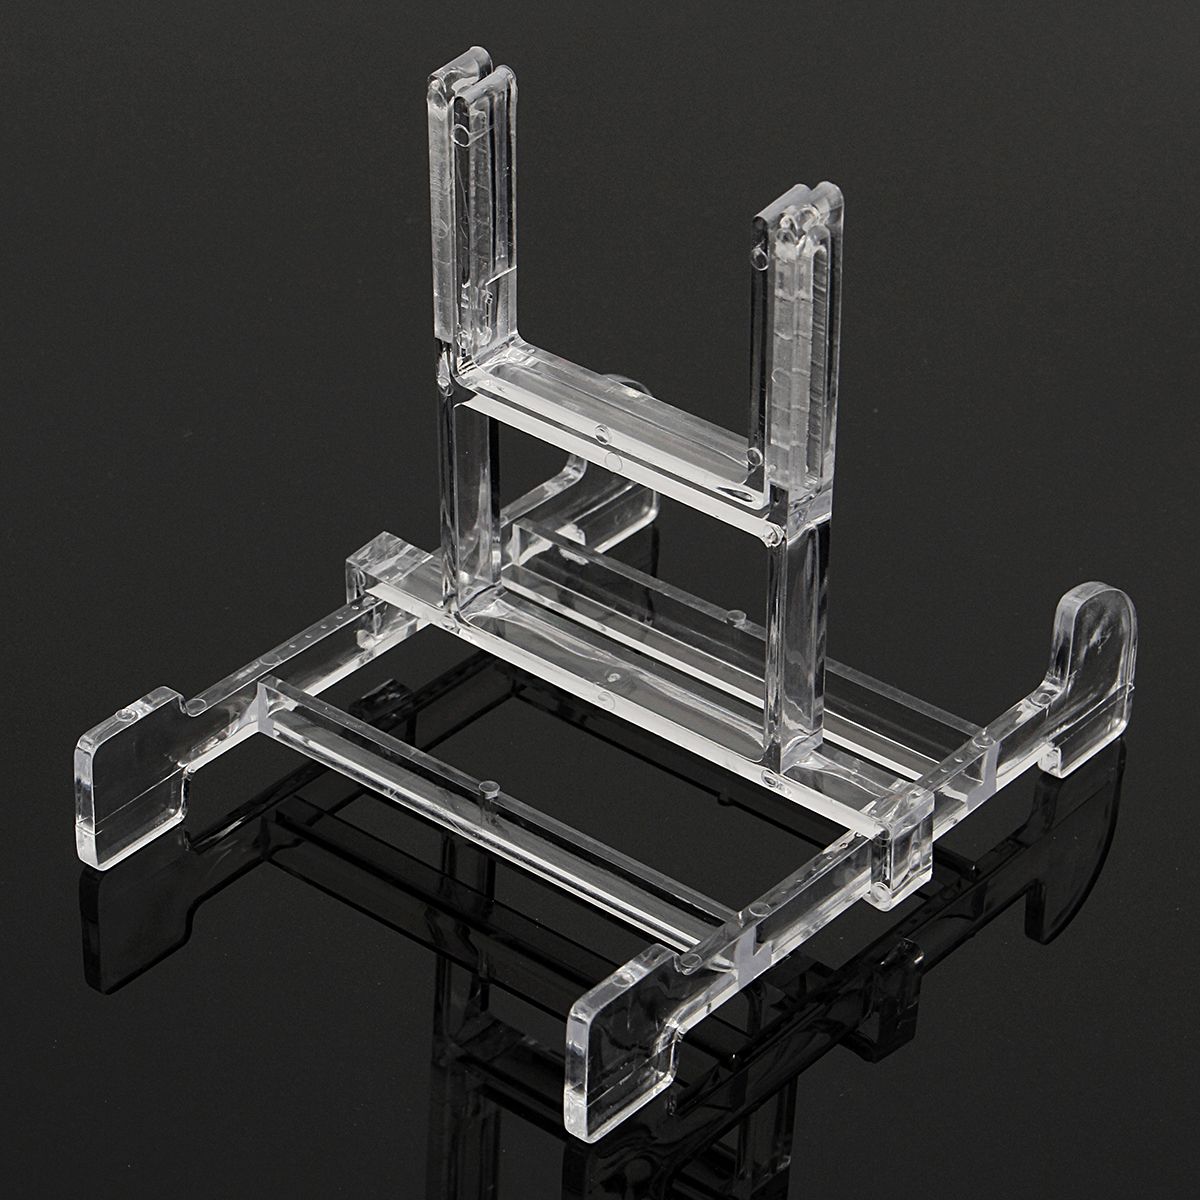 Clear-Adjustable-3quot-5quot-Easel-Jewelry-Display-Stand-Plate-Bowl-Photo-Frame-Book-Artwor-1461085